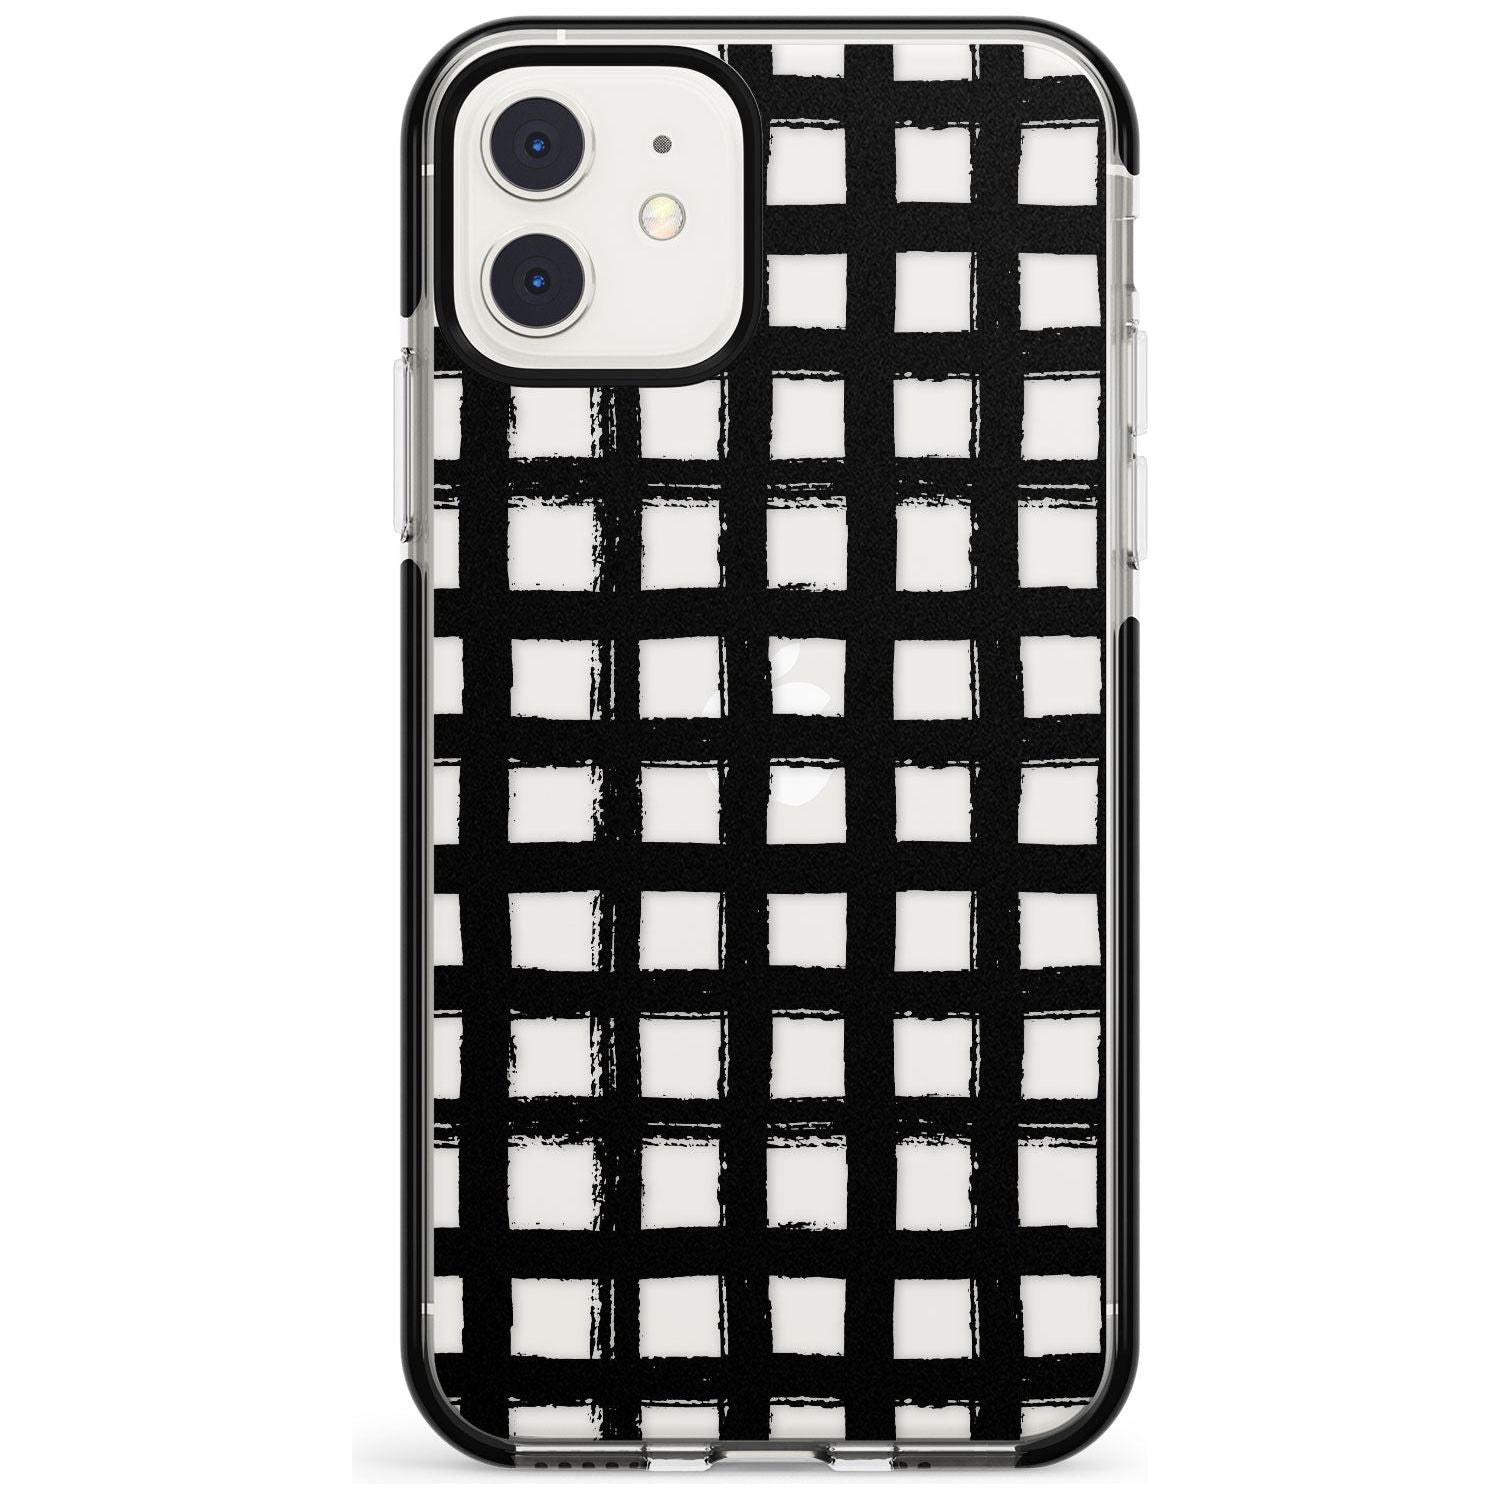 Messy Black Grid - Clear Pink Fade Impact Phone Case for iPhone 11 Pro Max